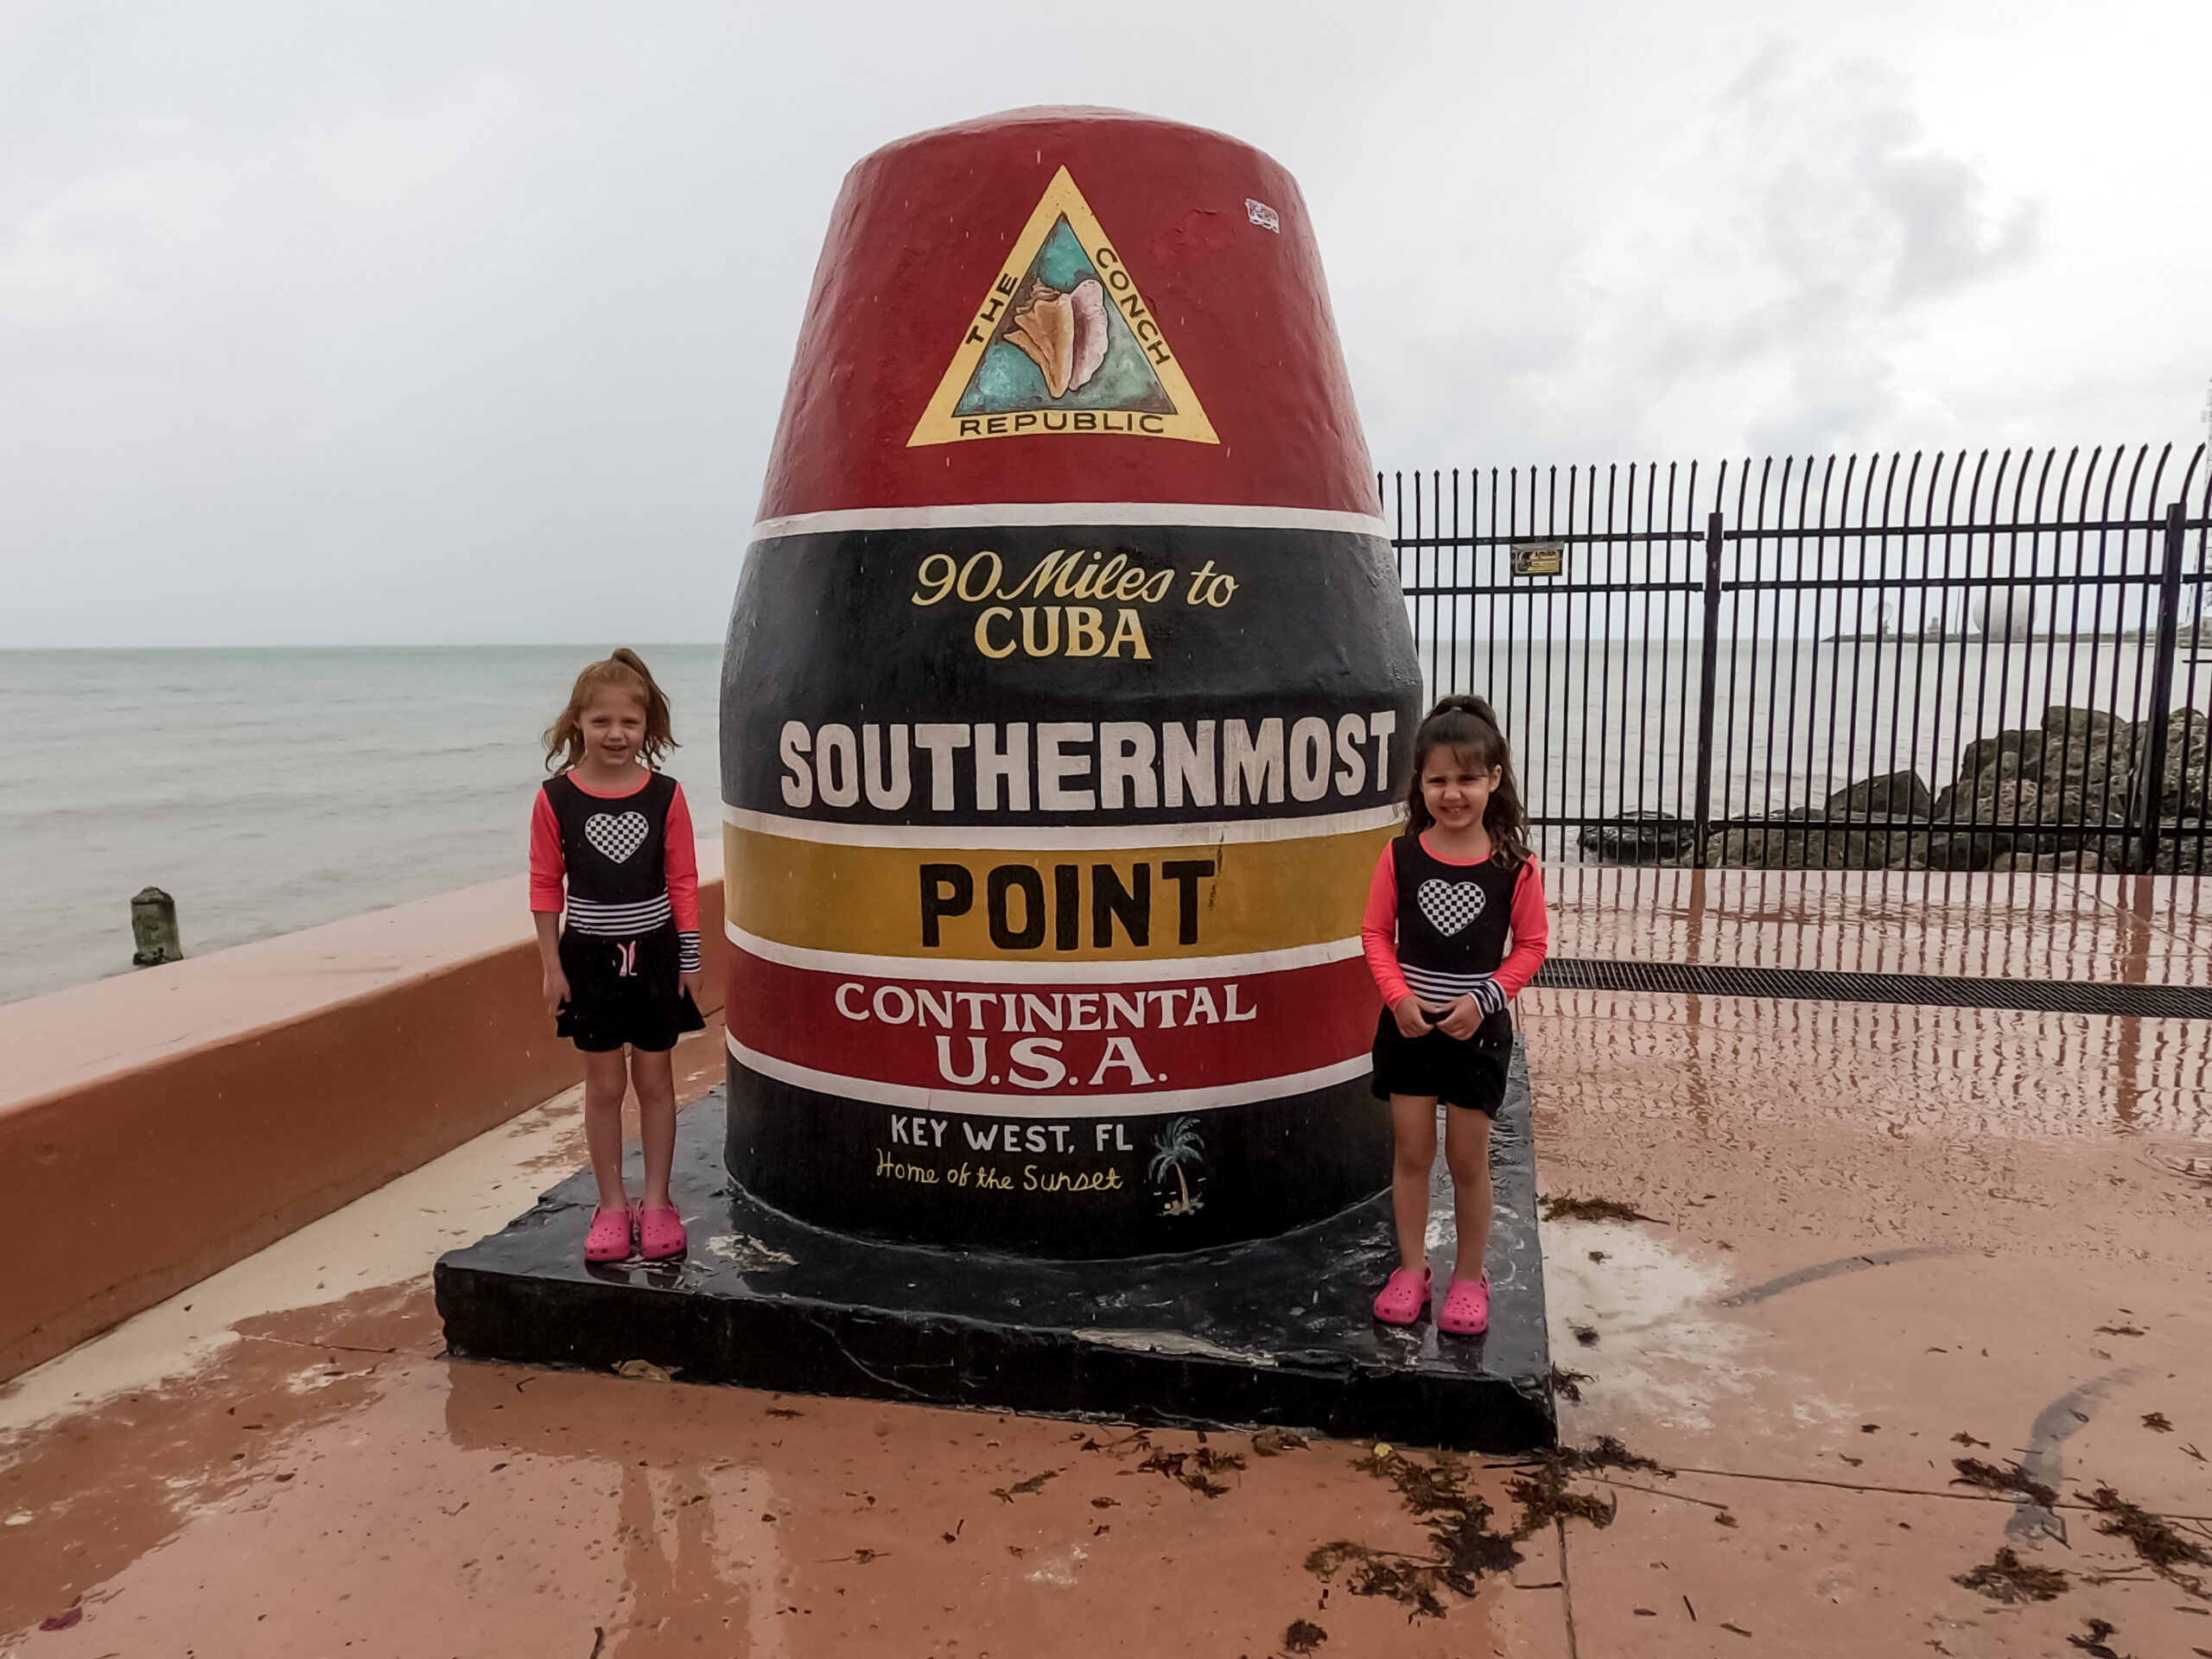 Key West, FL - Southernmost Point in the US